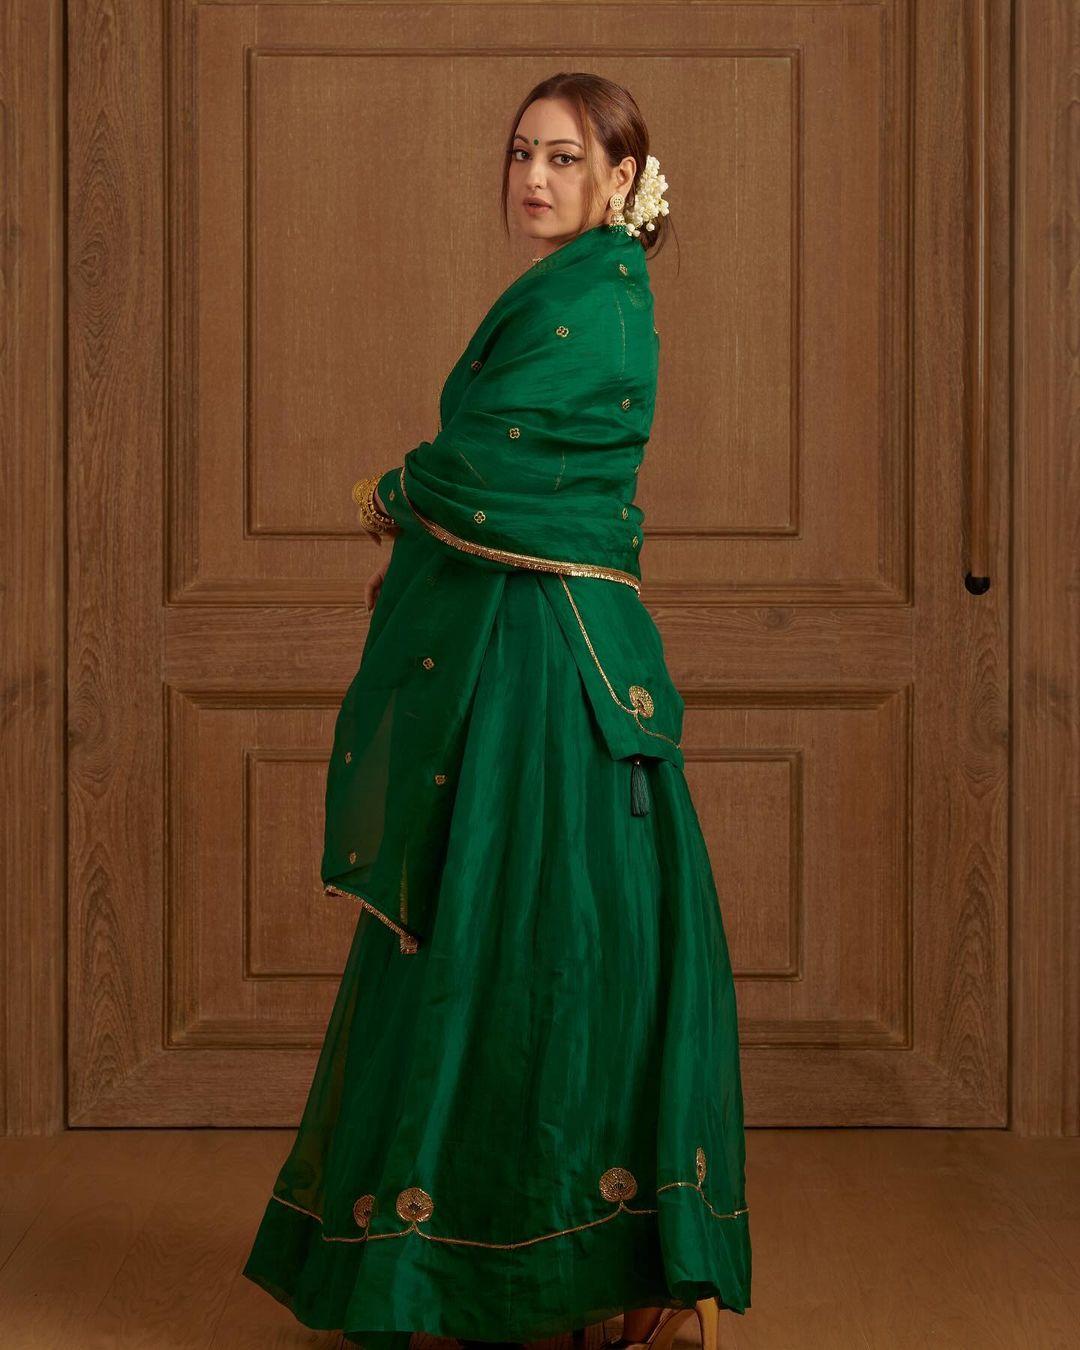 Sonakshi Sinha looked stunning in an all-green ensemble. The actress donned a short kurta paired with a matching skirt and complemented it with a dupatta featuring a contrasting golden border